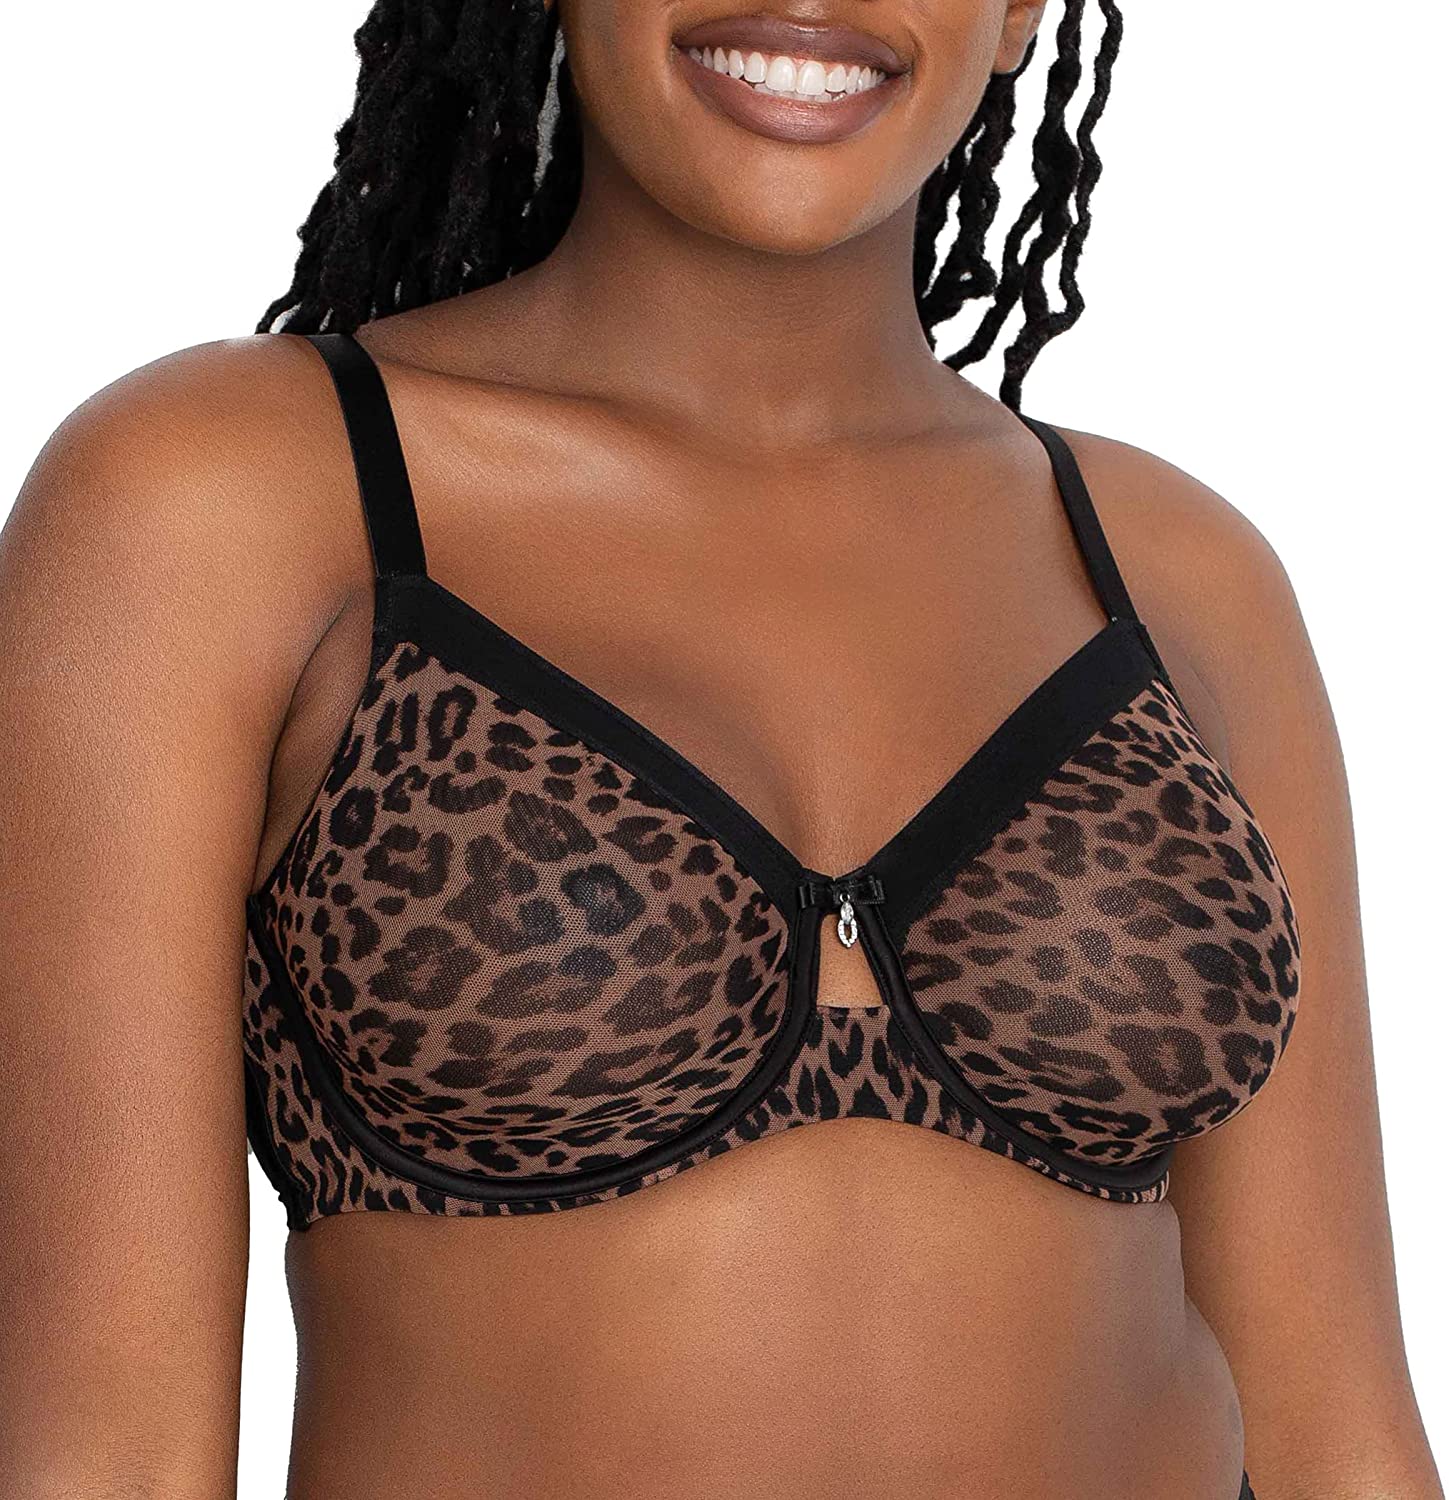 Curvy Couture Women's Sheer Mesh Full Coverage Unlined Underwire Bra